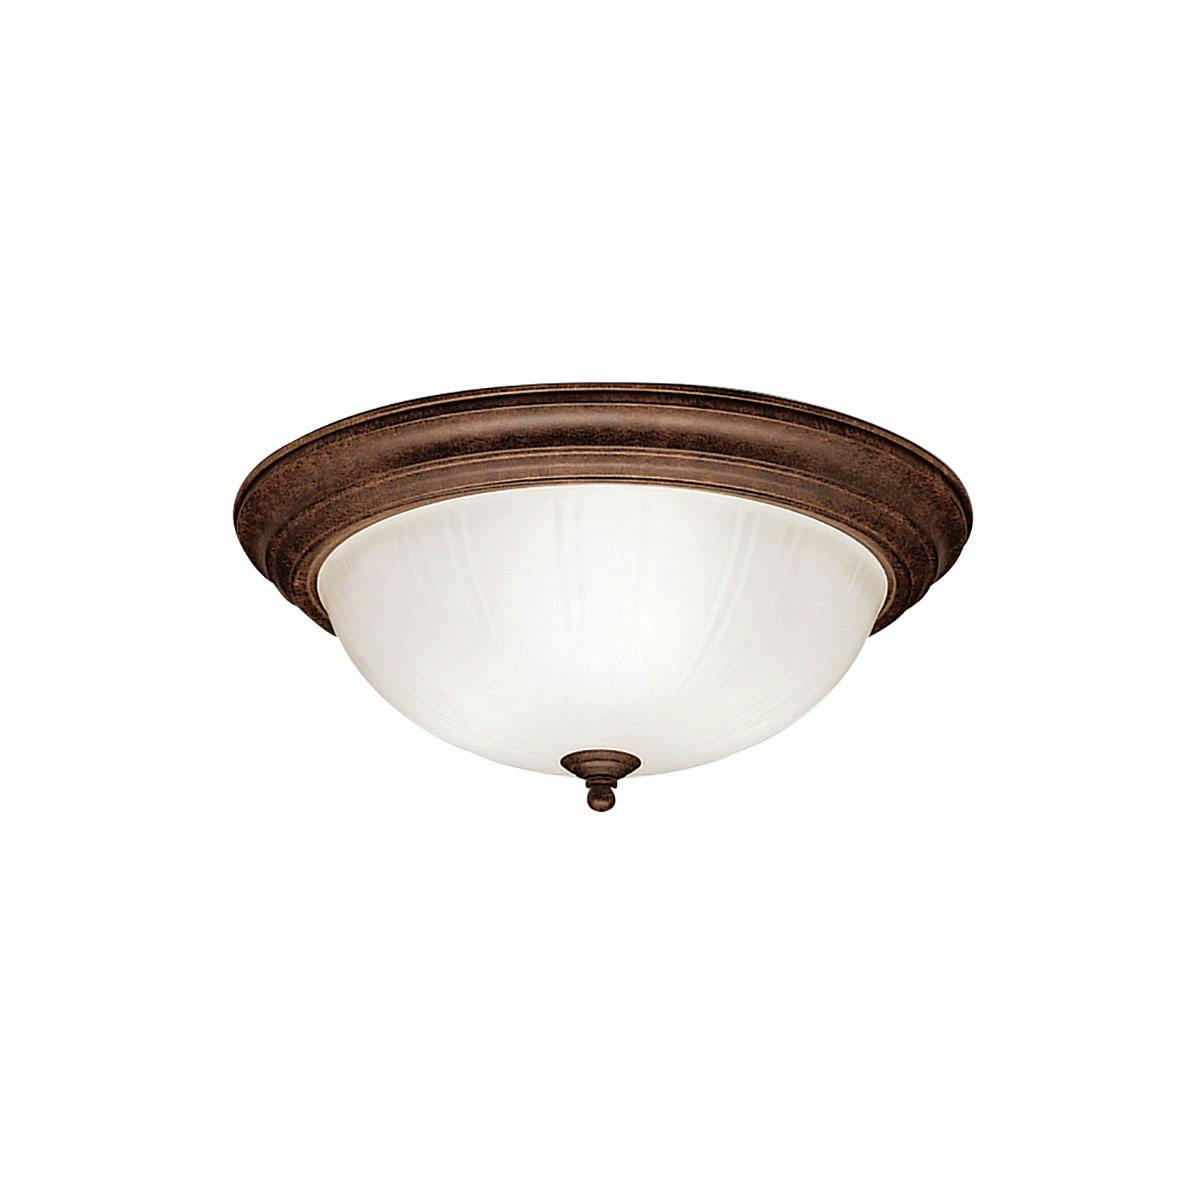 Hastings 15.25" Flush Mount Bronze on a white background